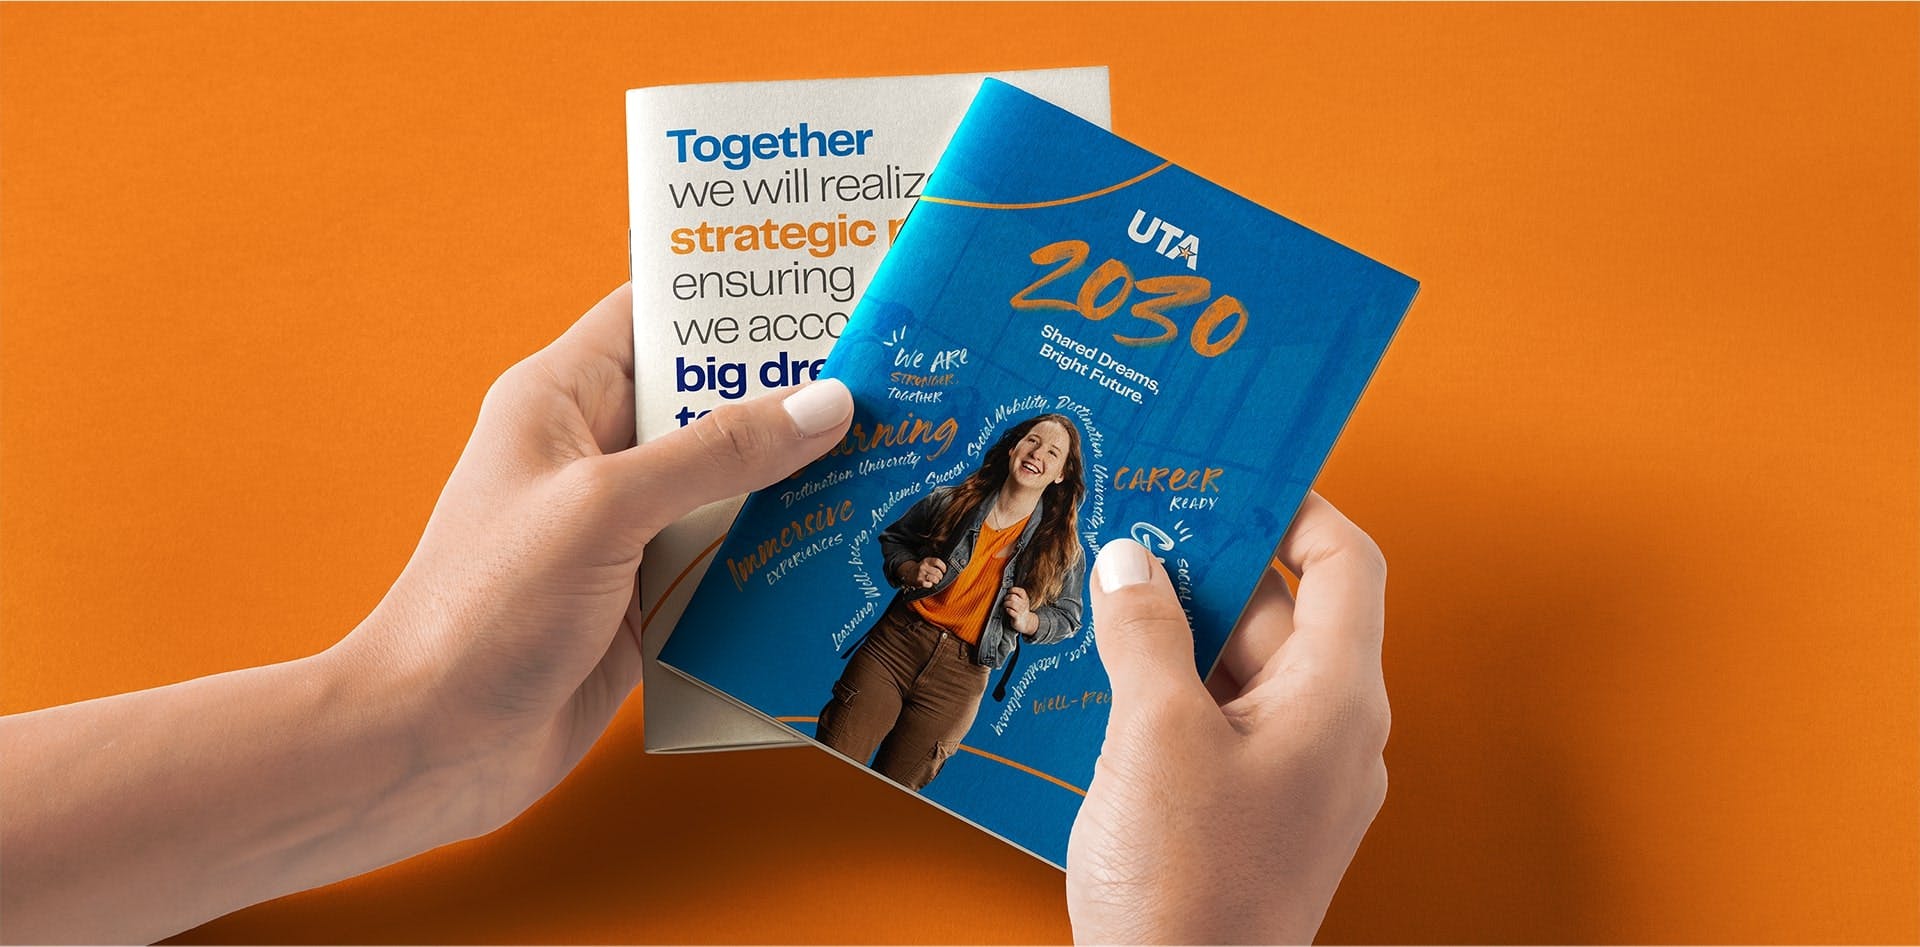 Hands holding brochures with "UTA 2030" branding and messages about shared dreams and bright futures on an orange background.